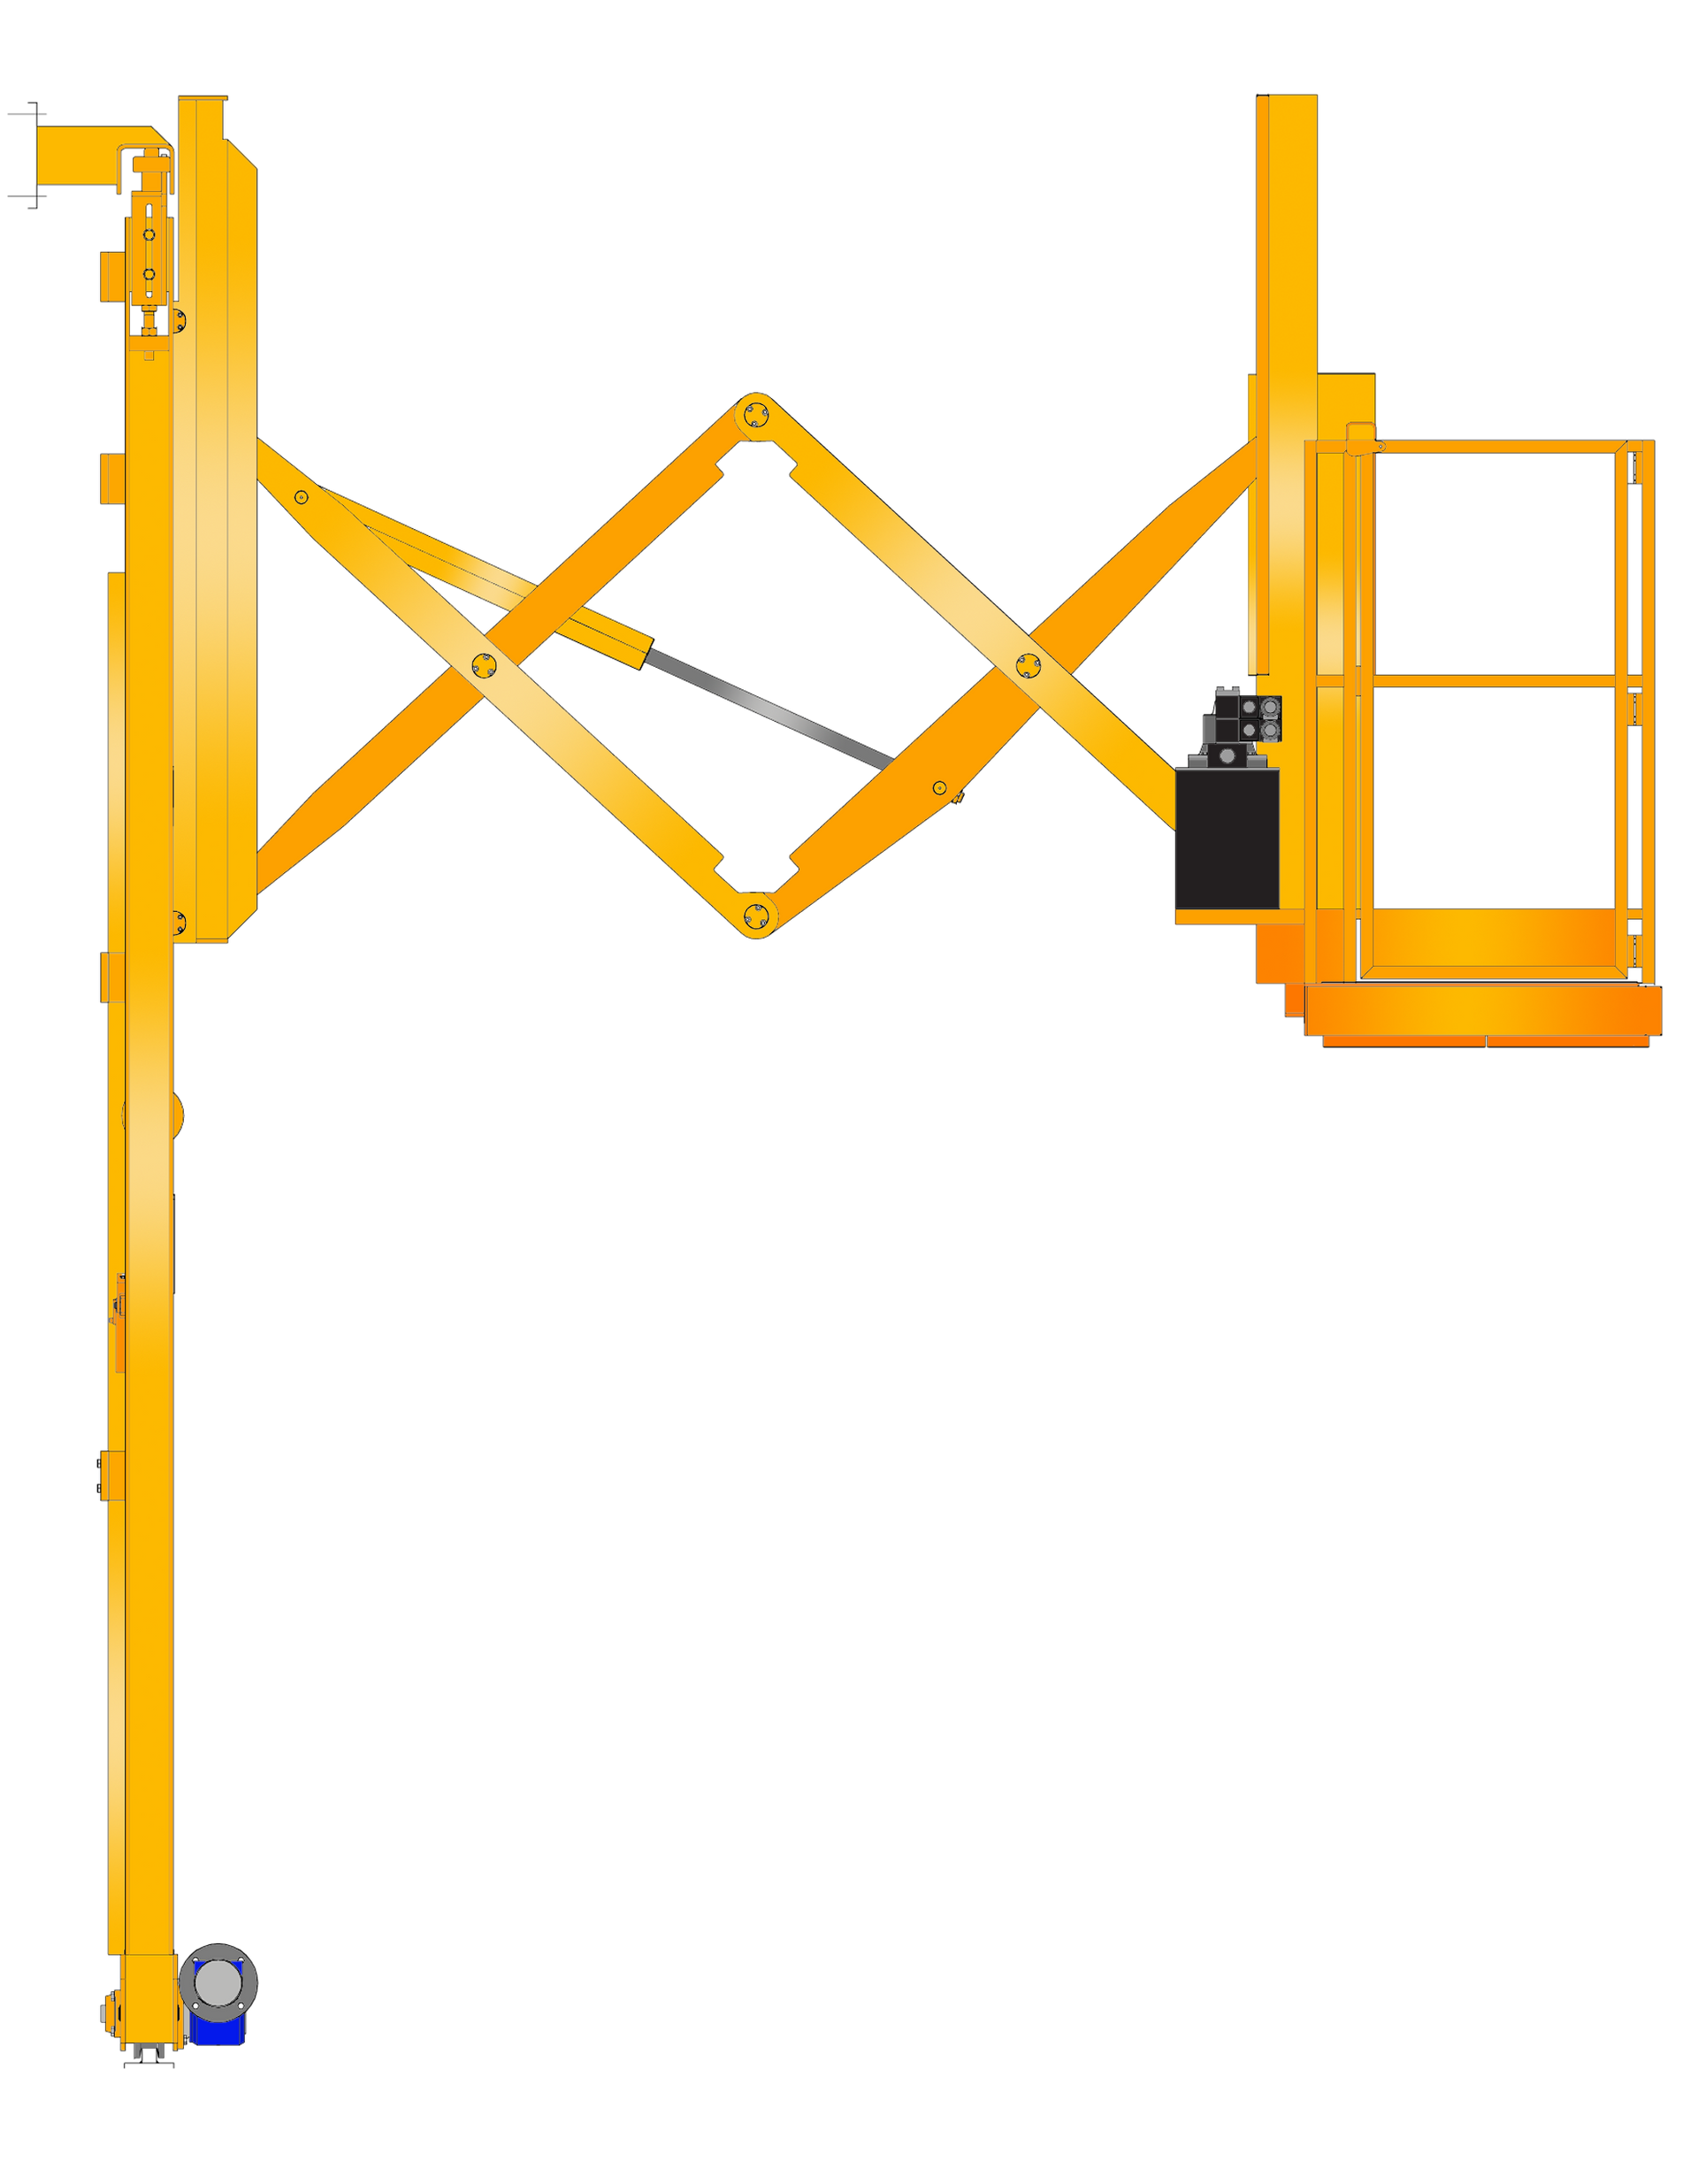 Wall mounted mobile 3-axis work platform